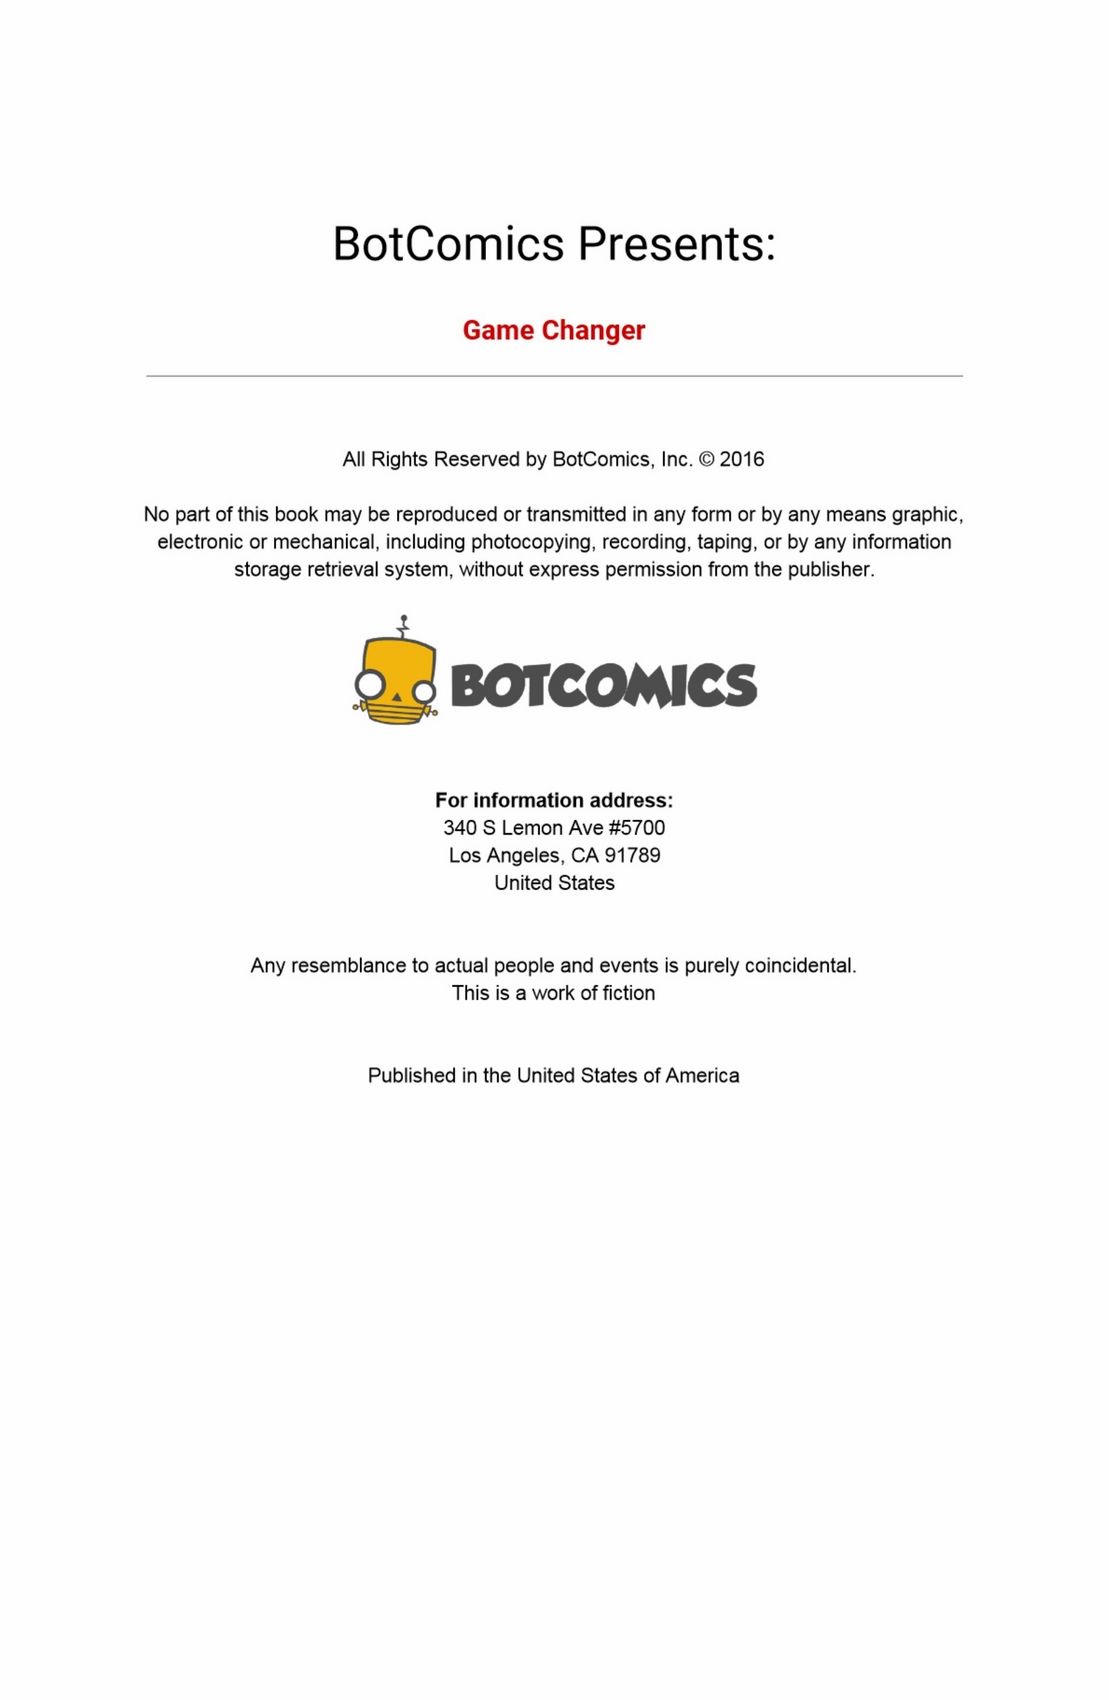 Game Changer Issue 4 BotComics page 2